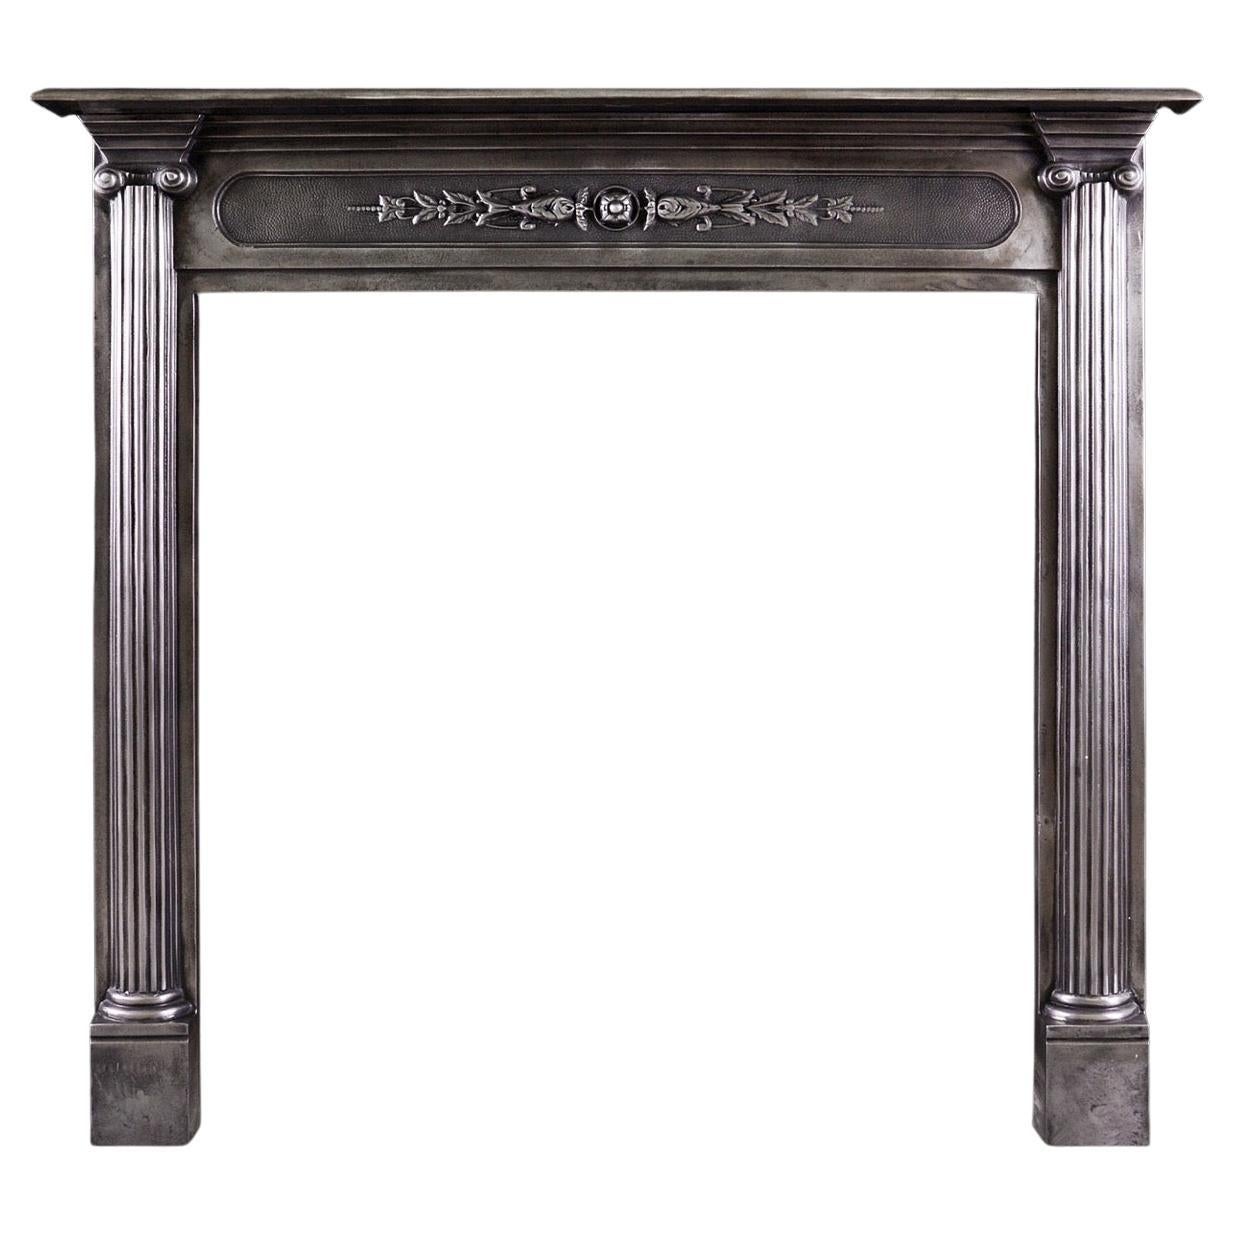 A Polished Cast Iron Fireplace in the Classical Style